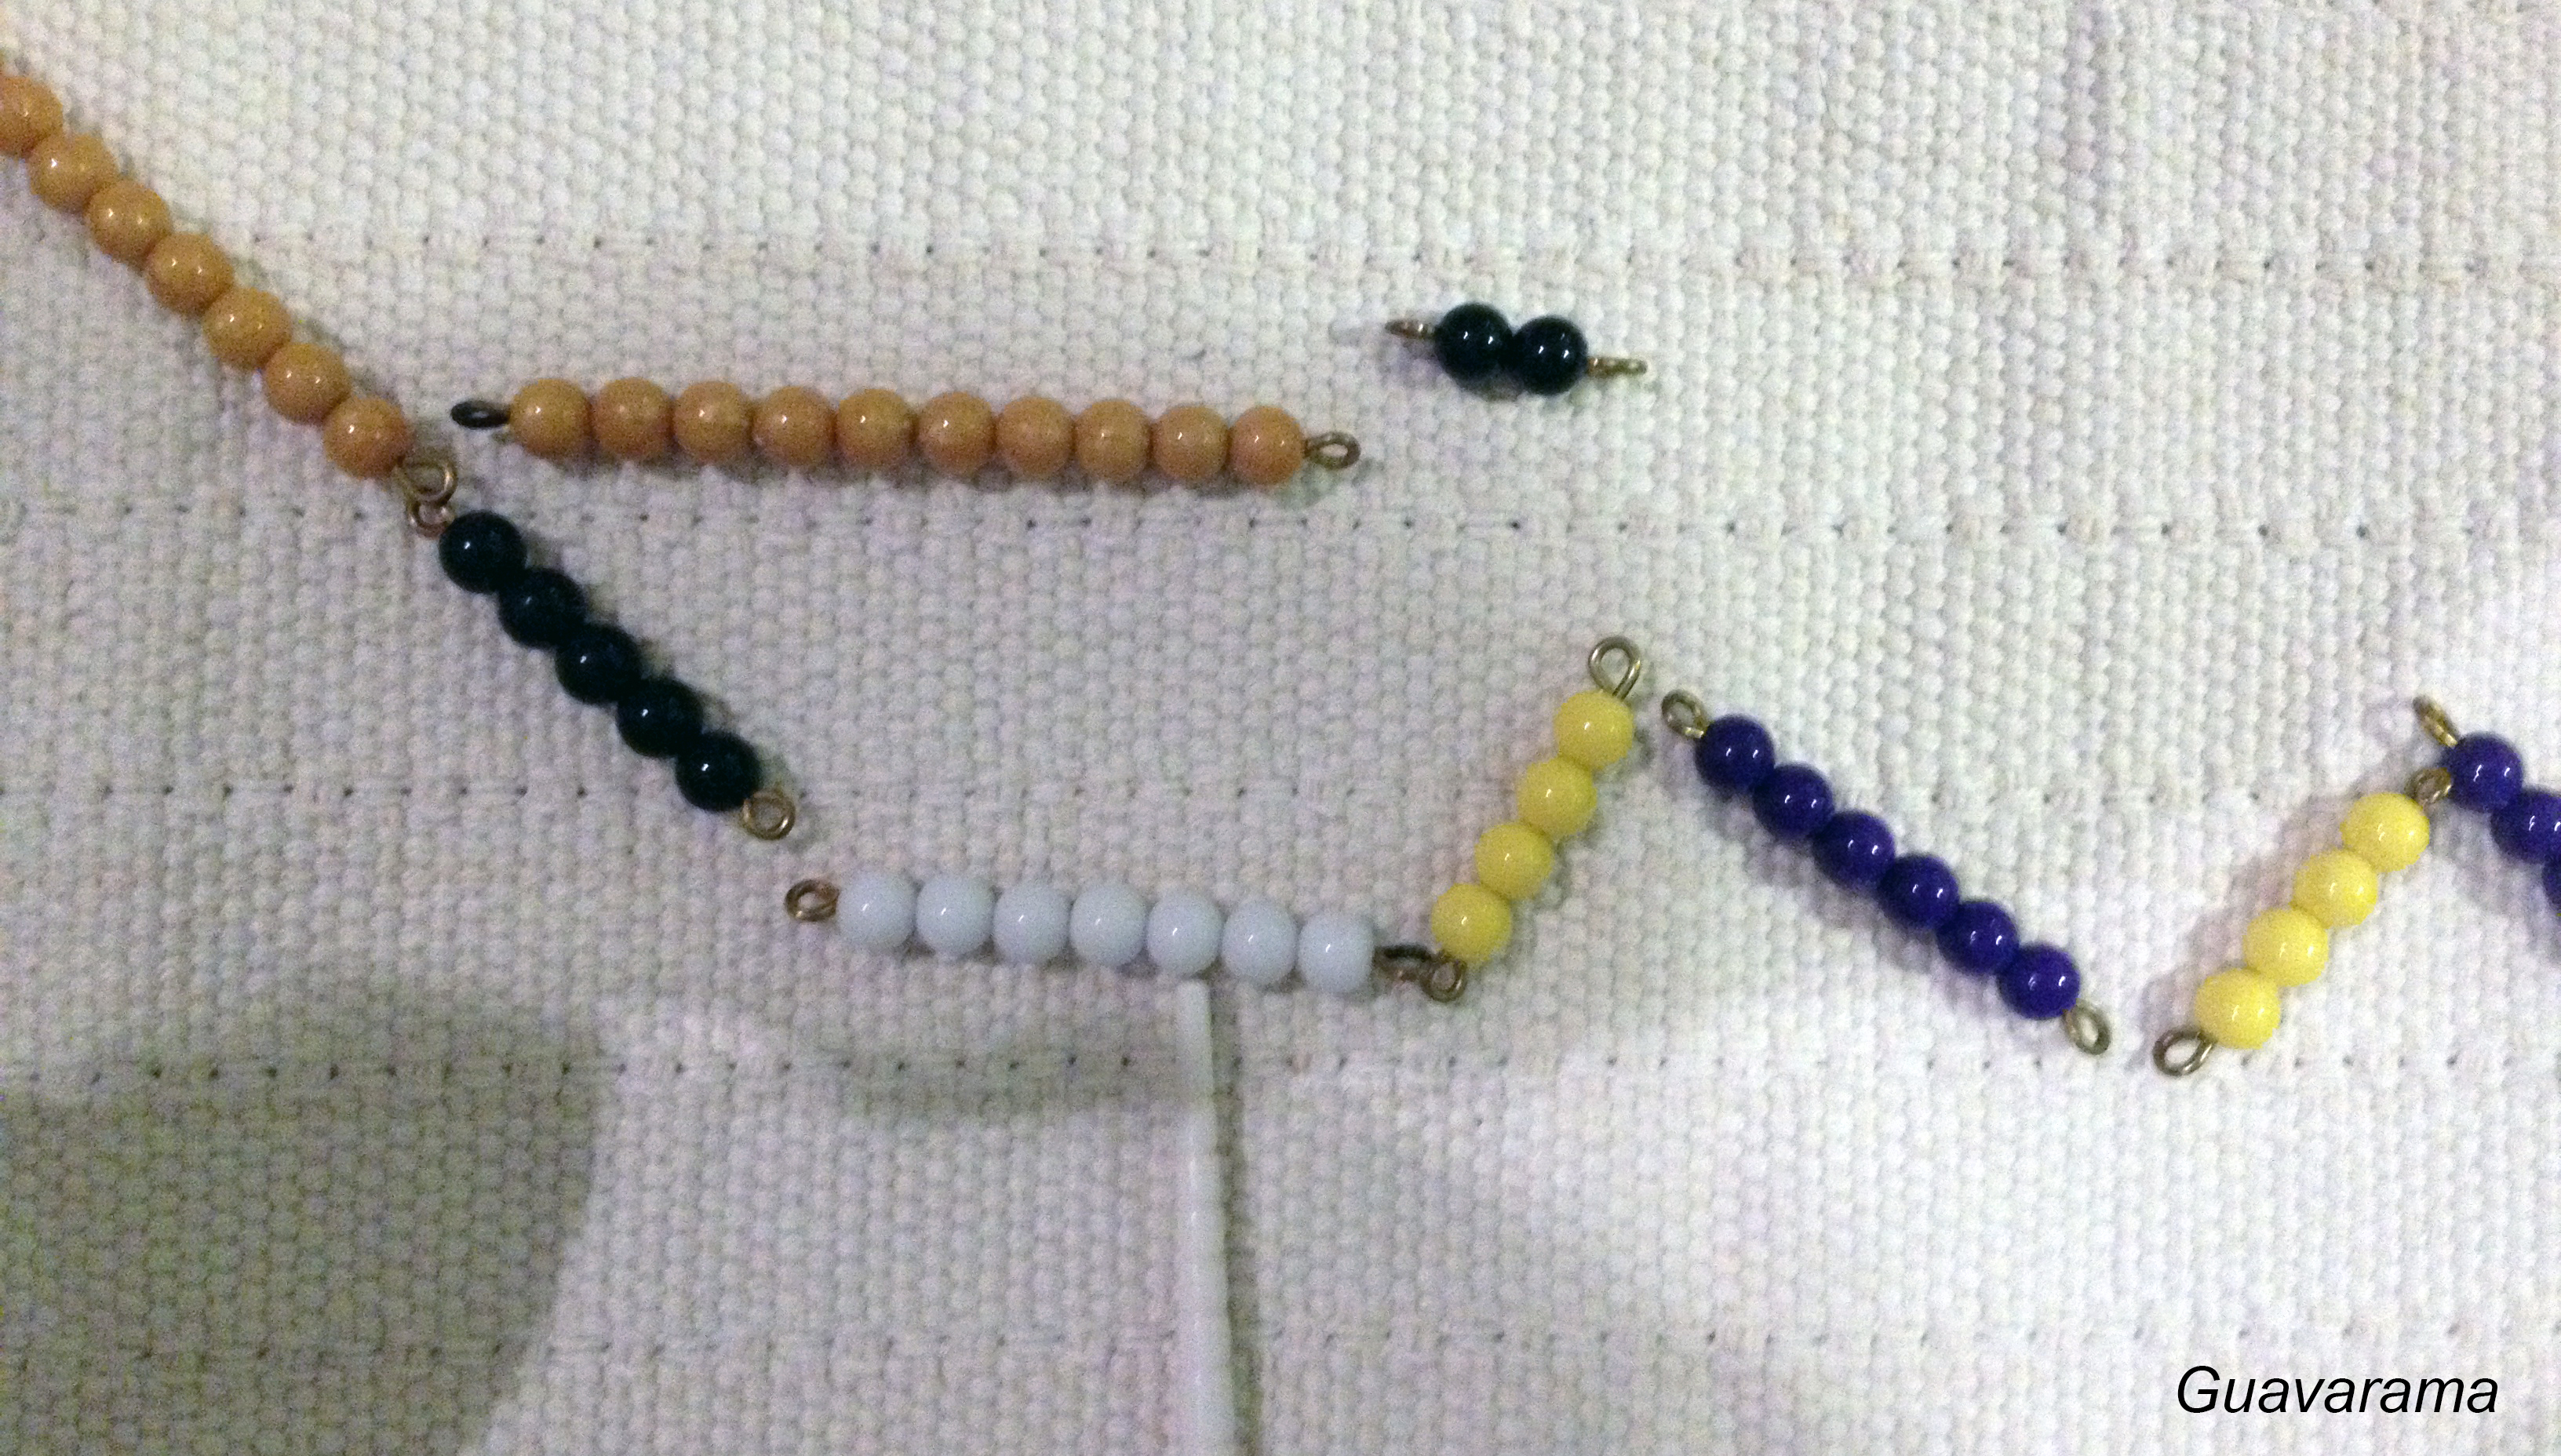 Mark the spot where you count to 10, exchange that for 10-bar (gold) and place black/white bead bars for leftover beads.